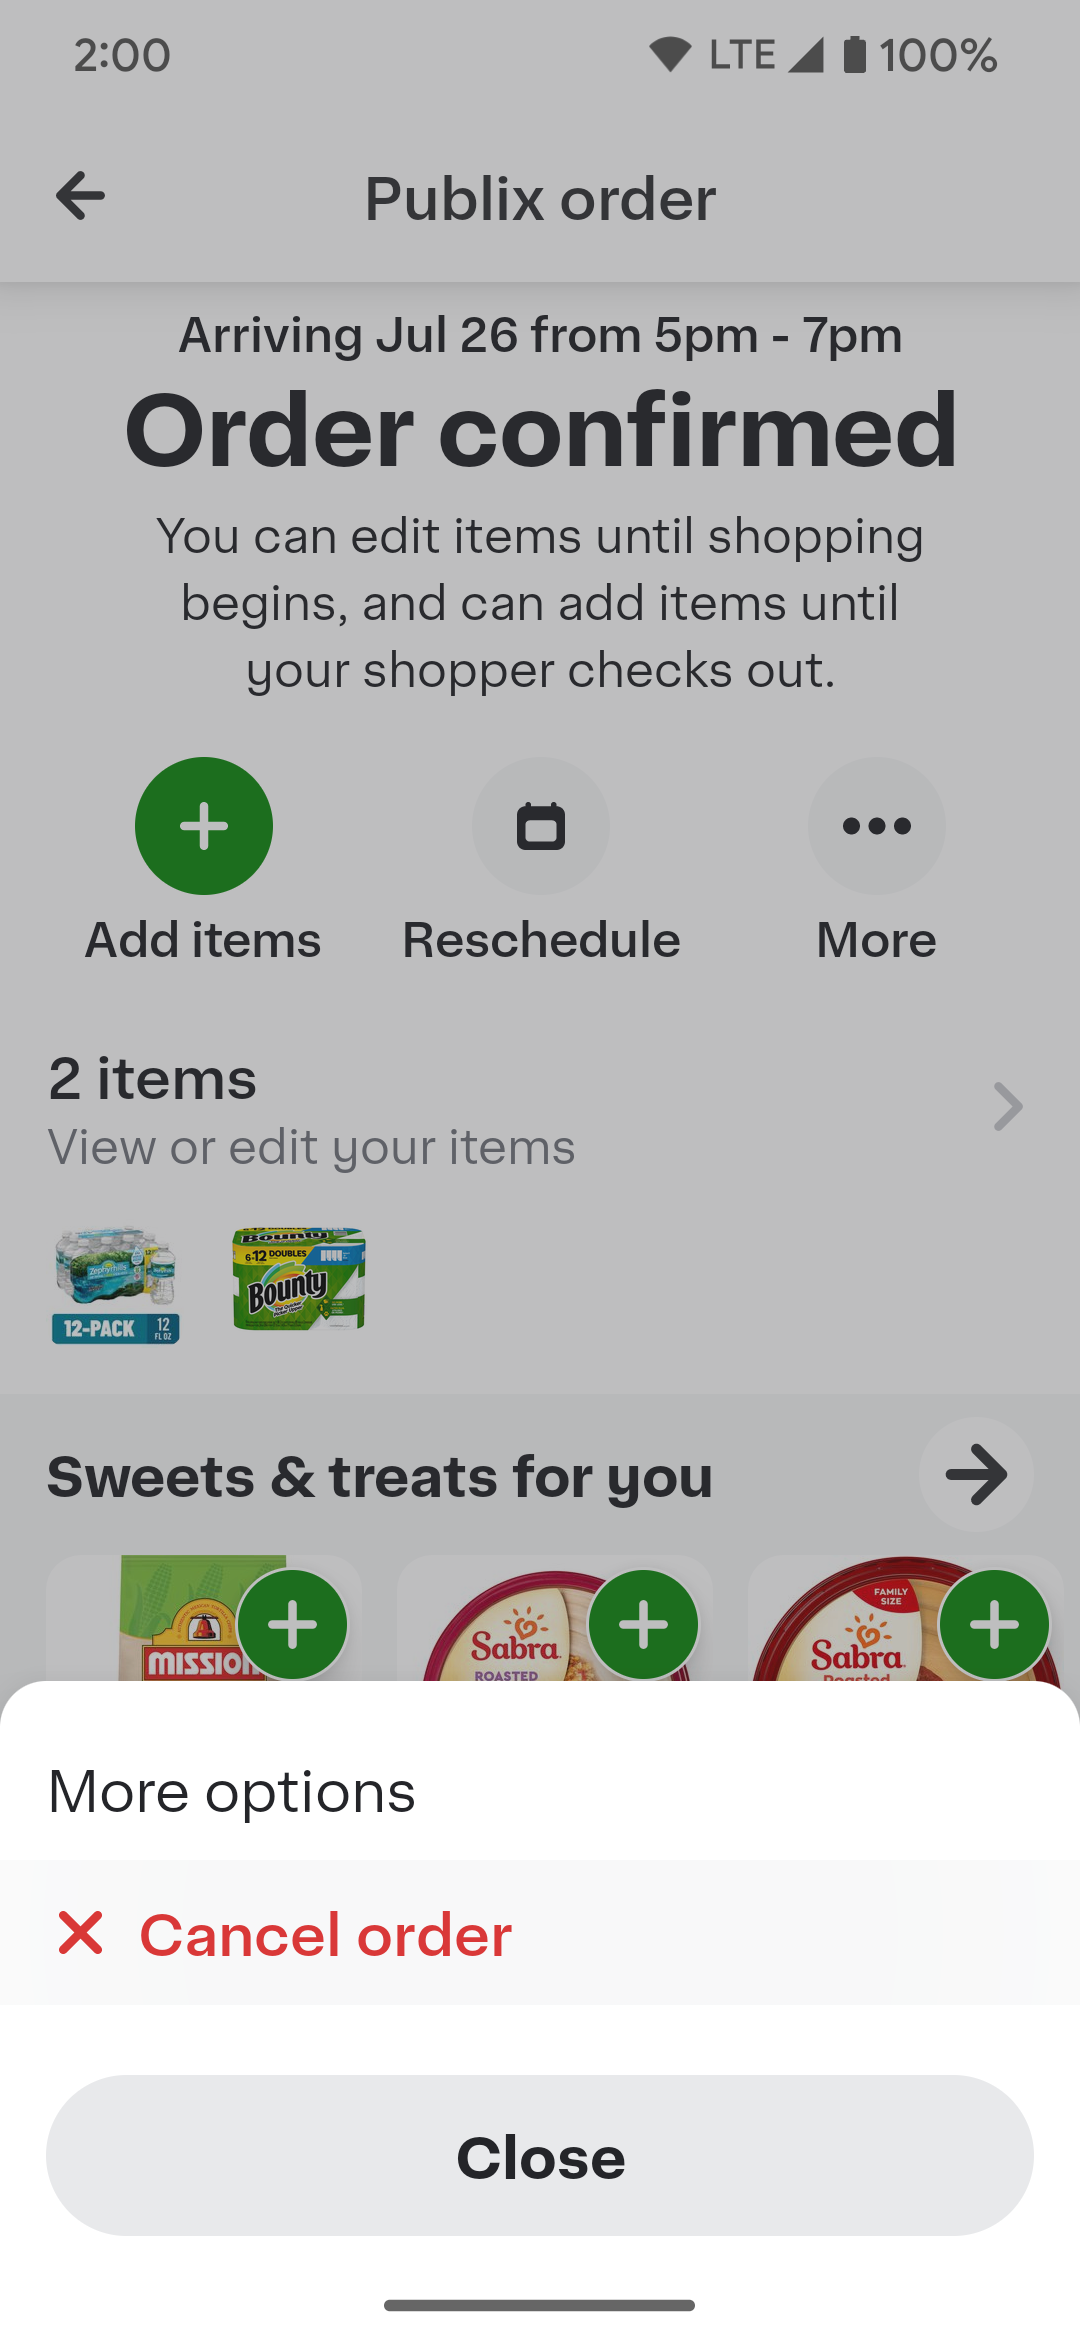 Pressing the Cancel order option for an Instacart order.